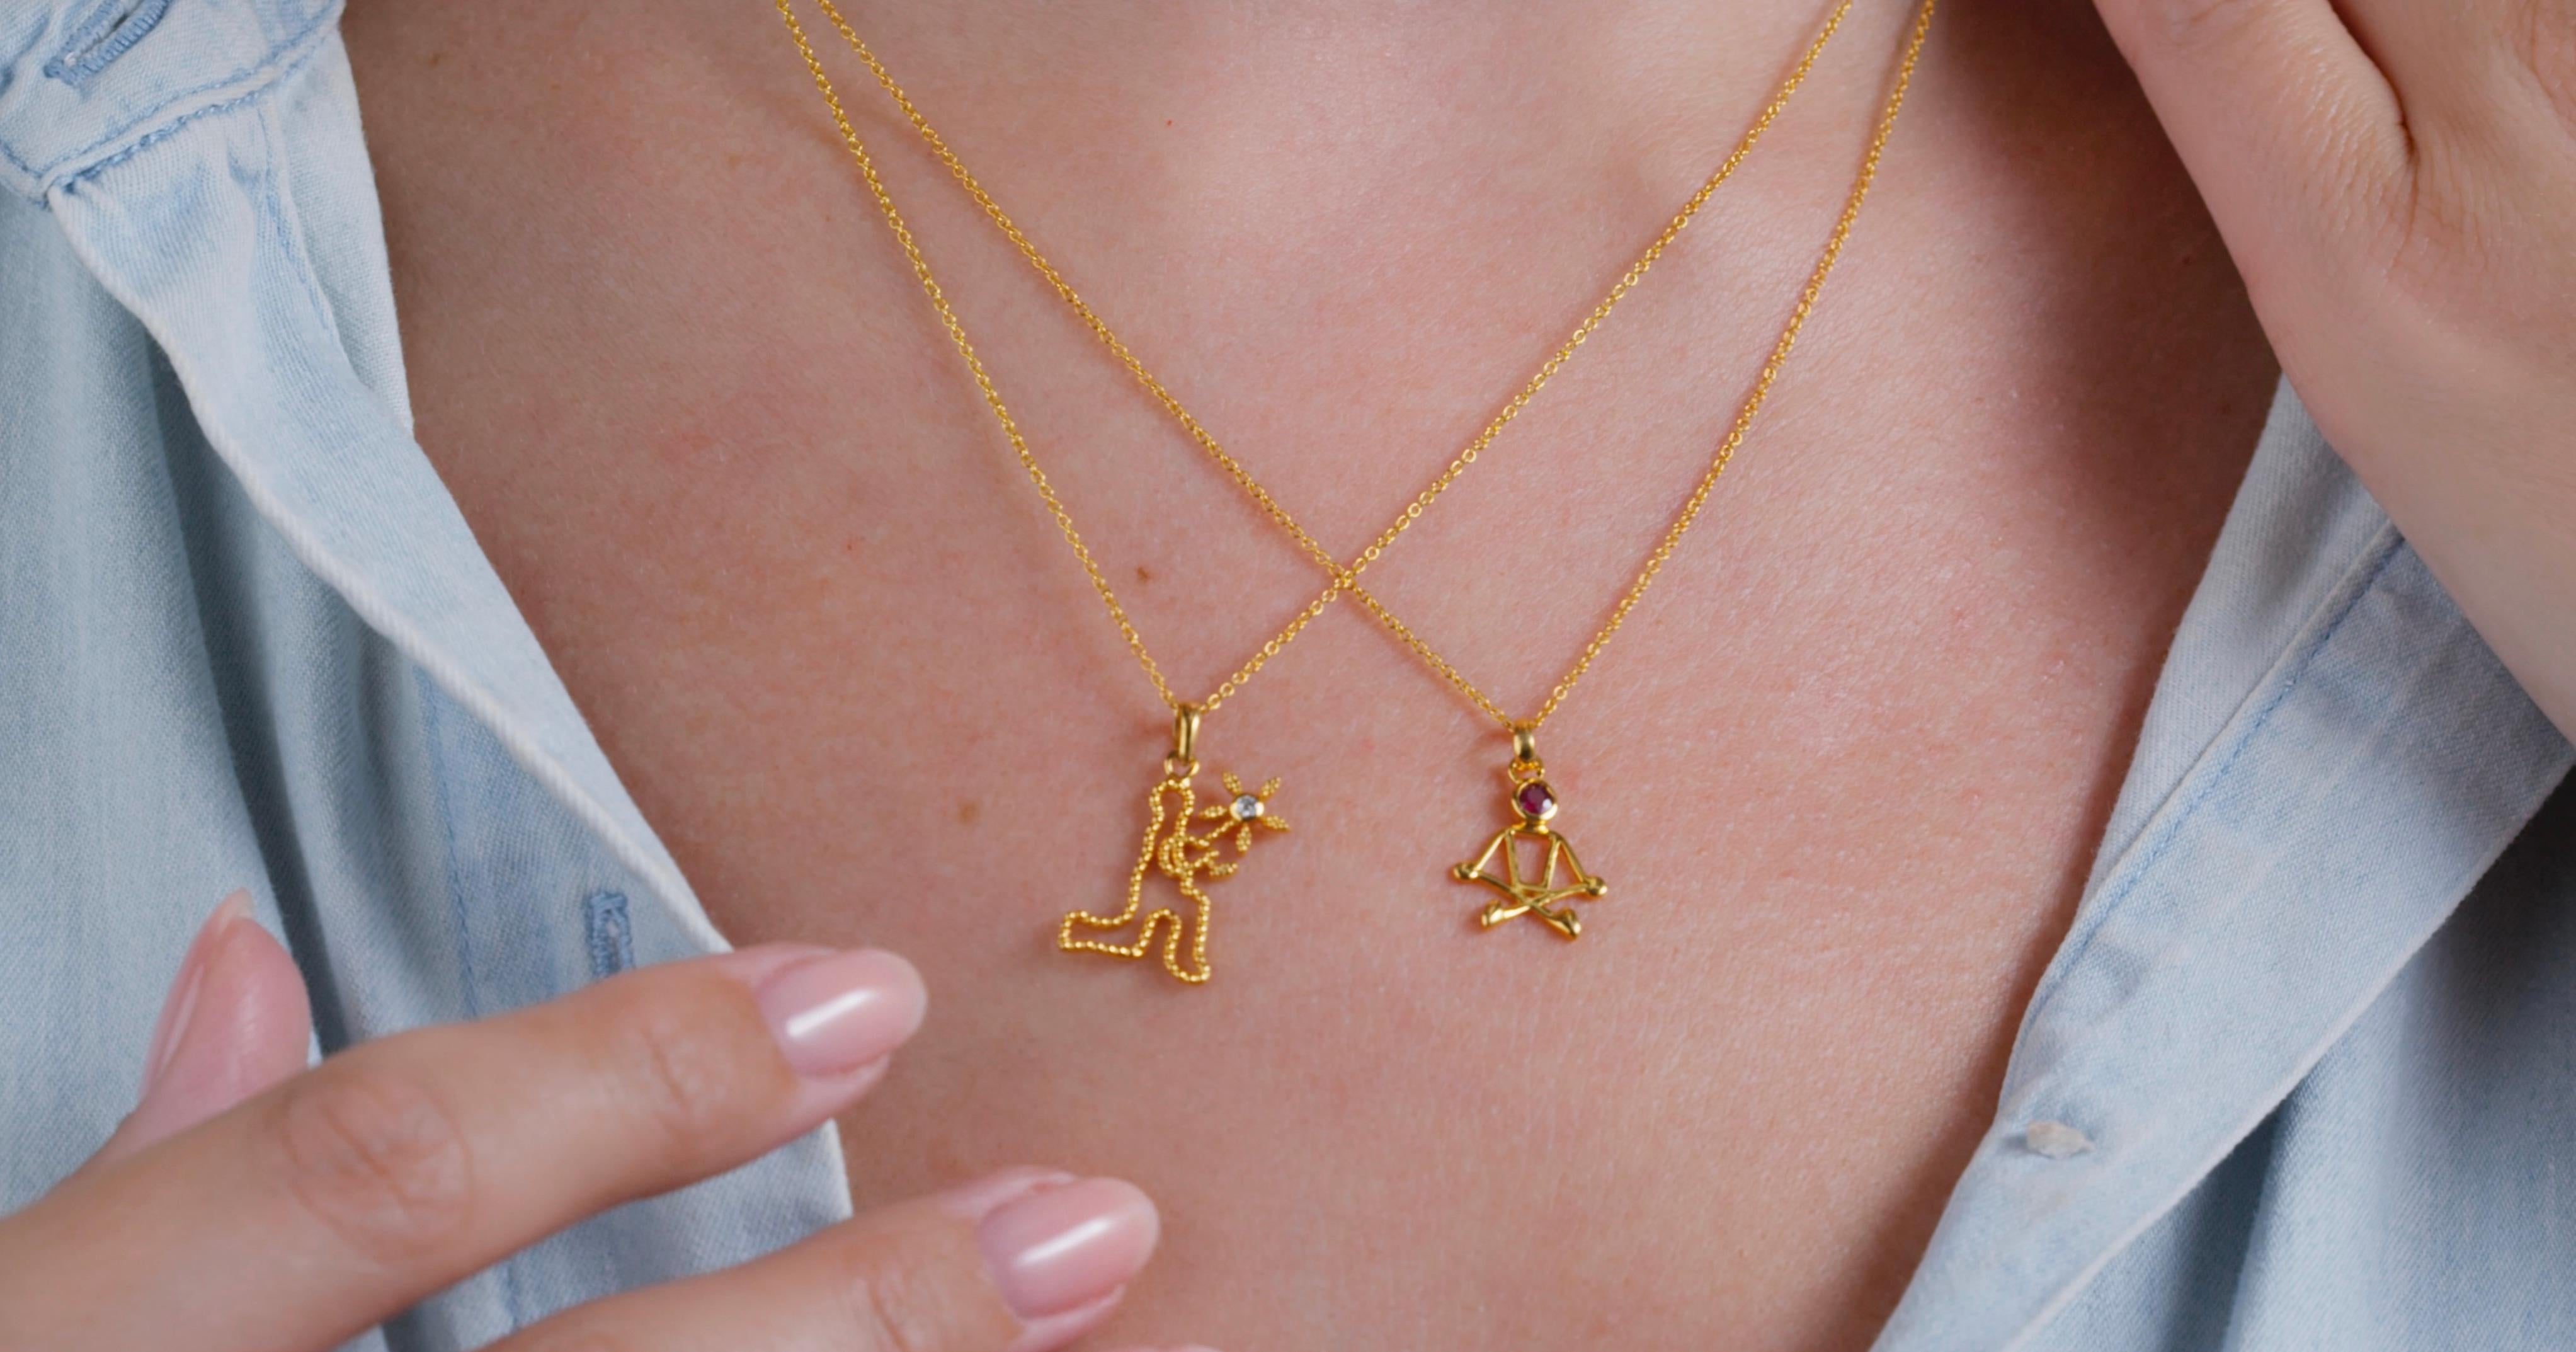 0.02 Carat Diamond Yellow Gold Stick Figure with Flower Pendant Necklace In New Condition For Sale In Woodstock, GA